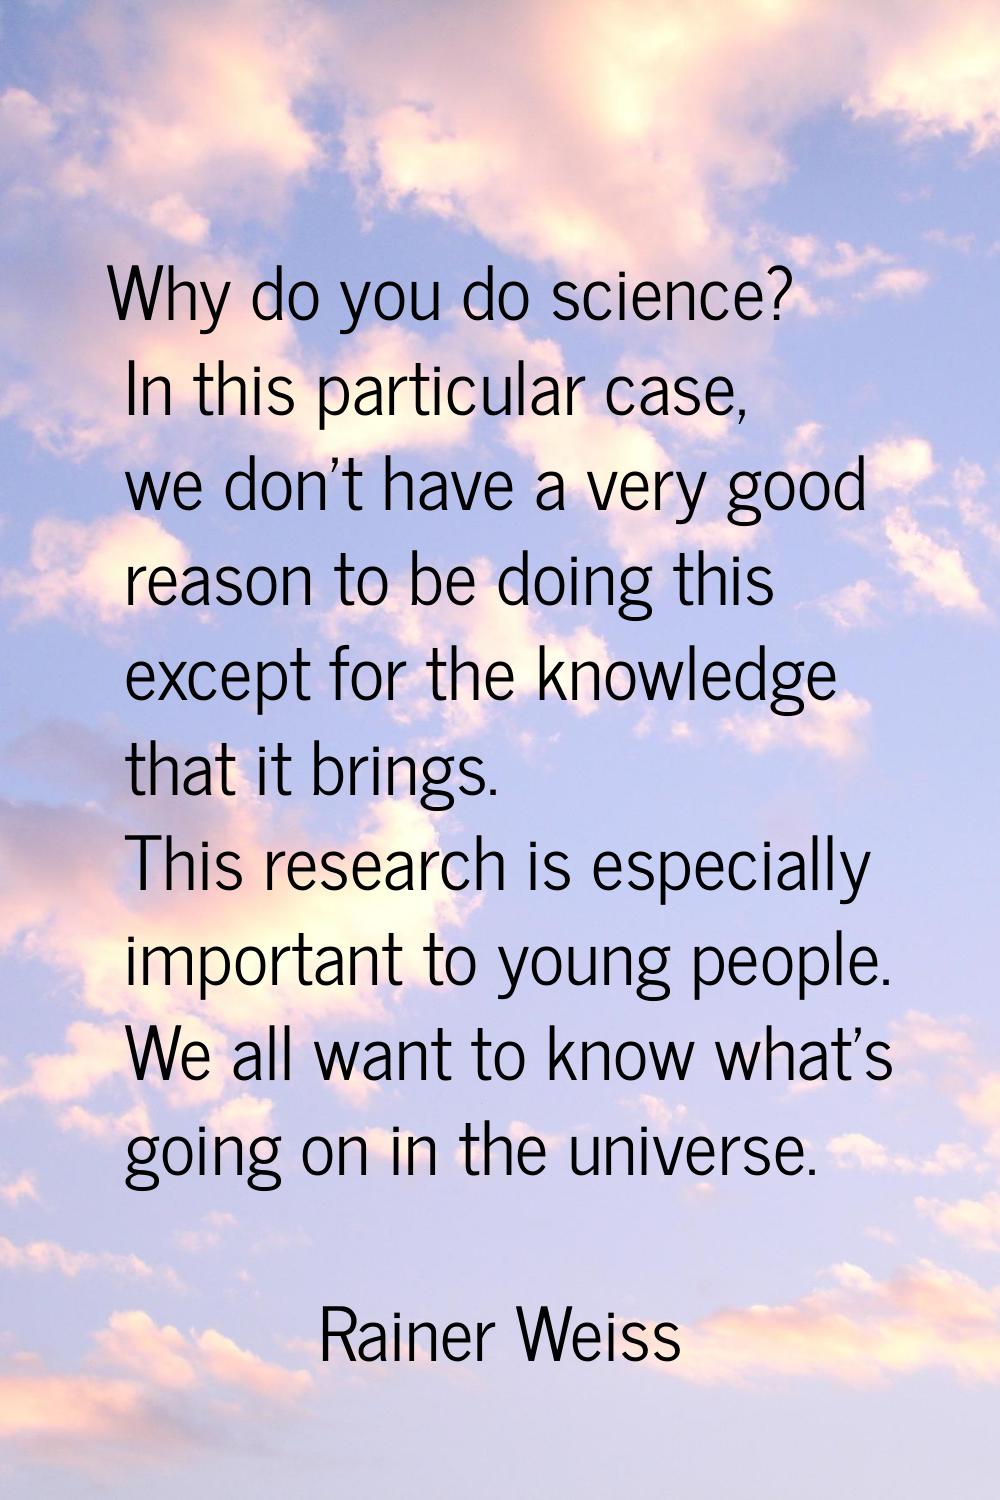 Why do you do science? In this particular case, we don't have a very good reason to be doing this e